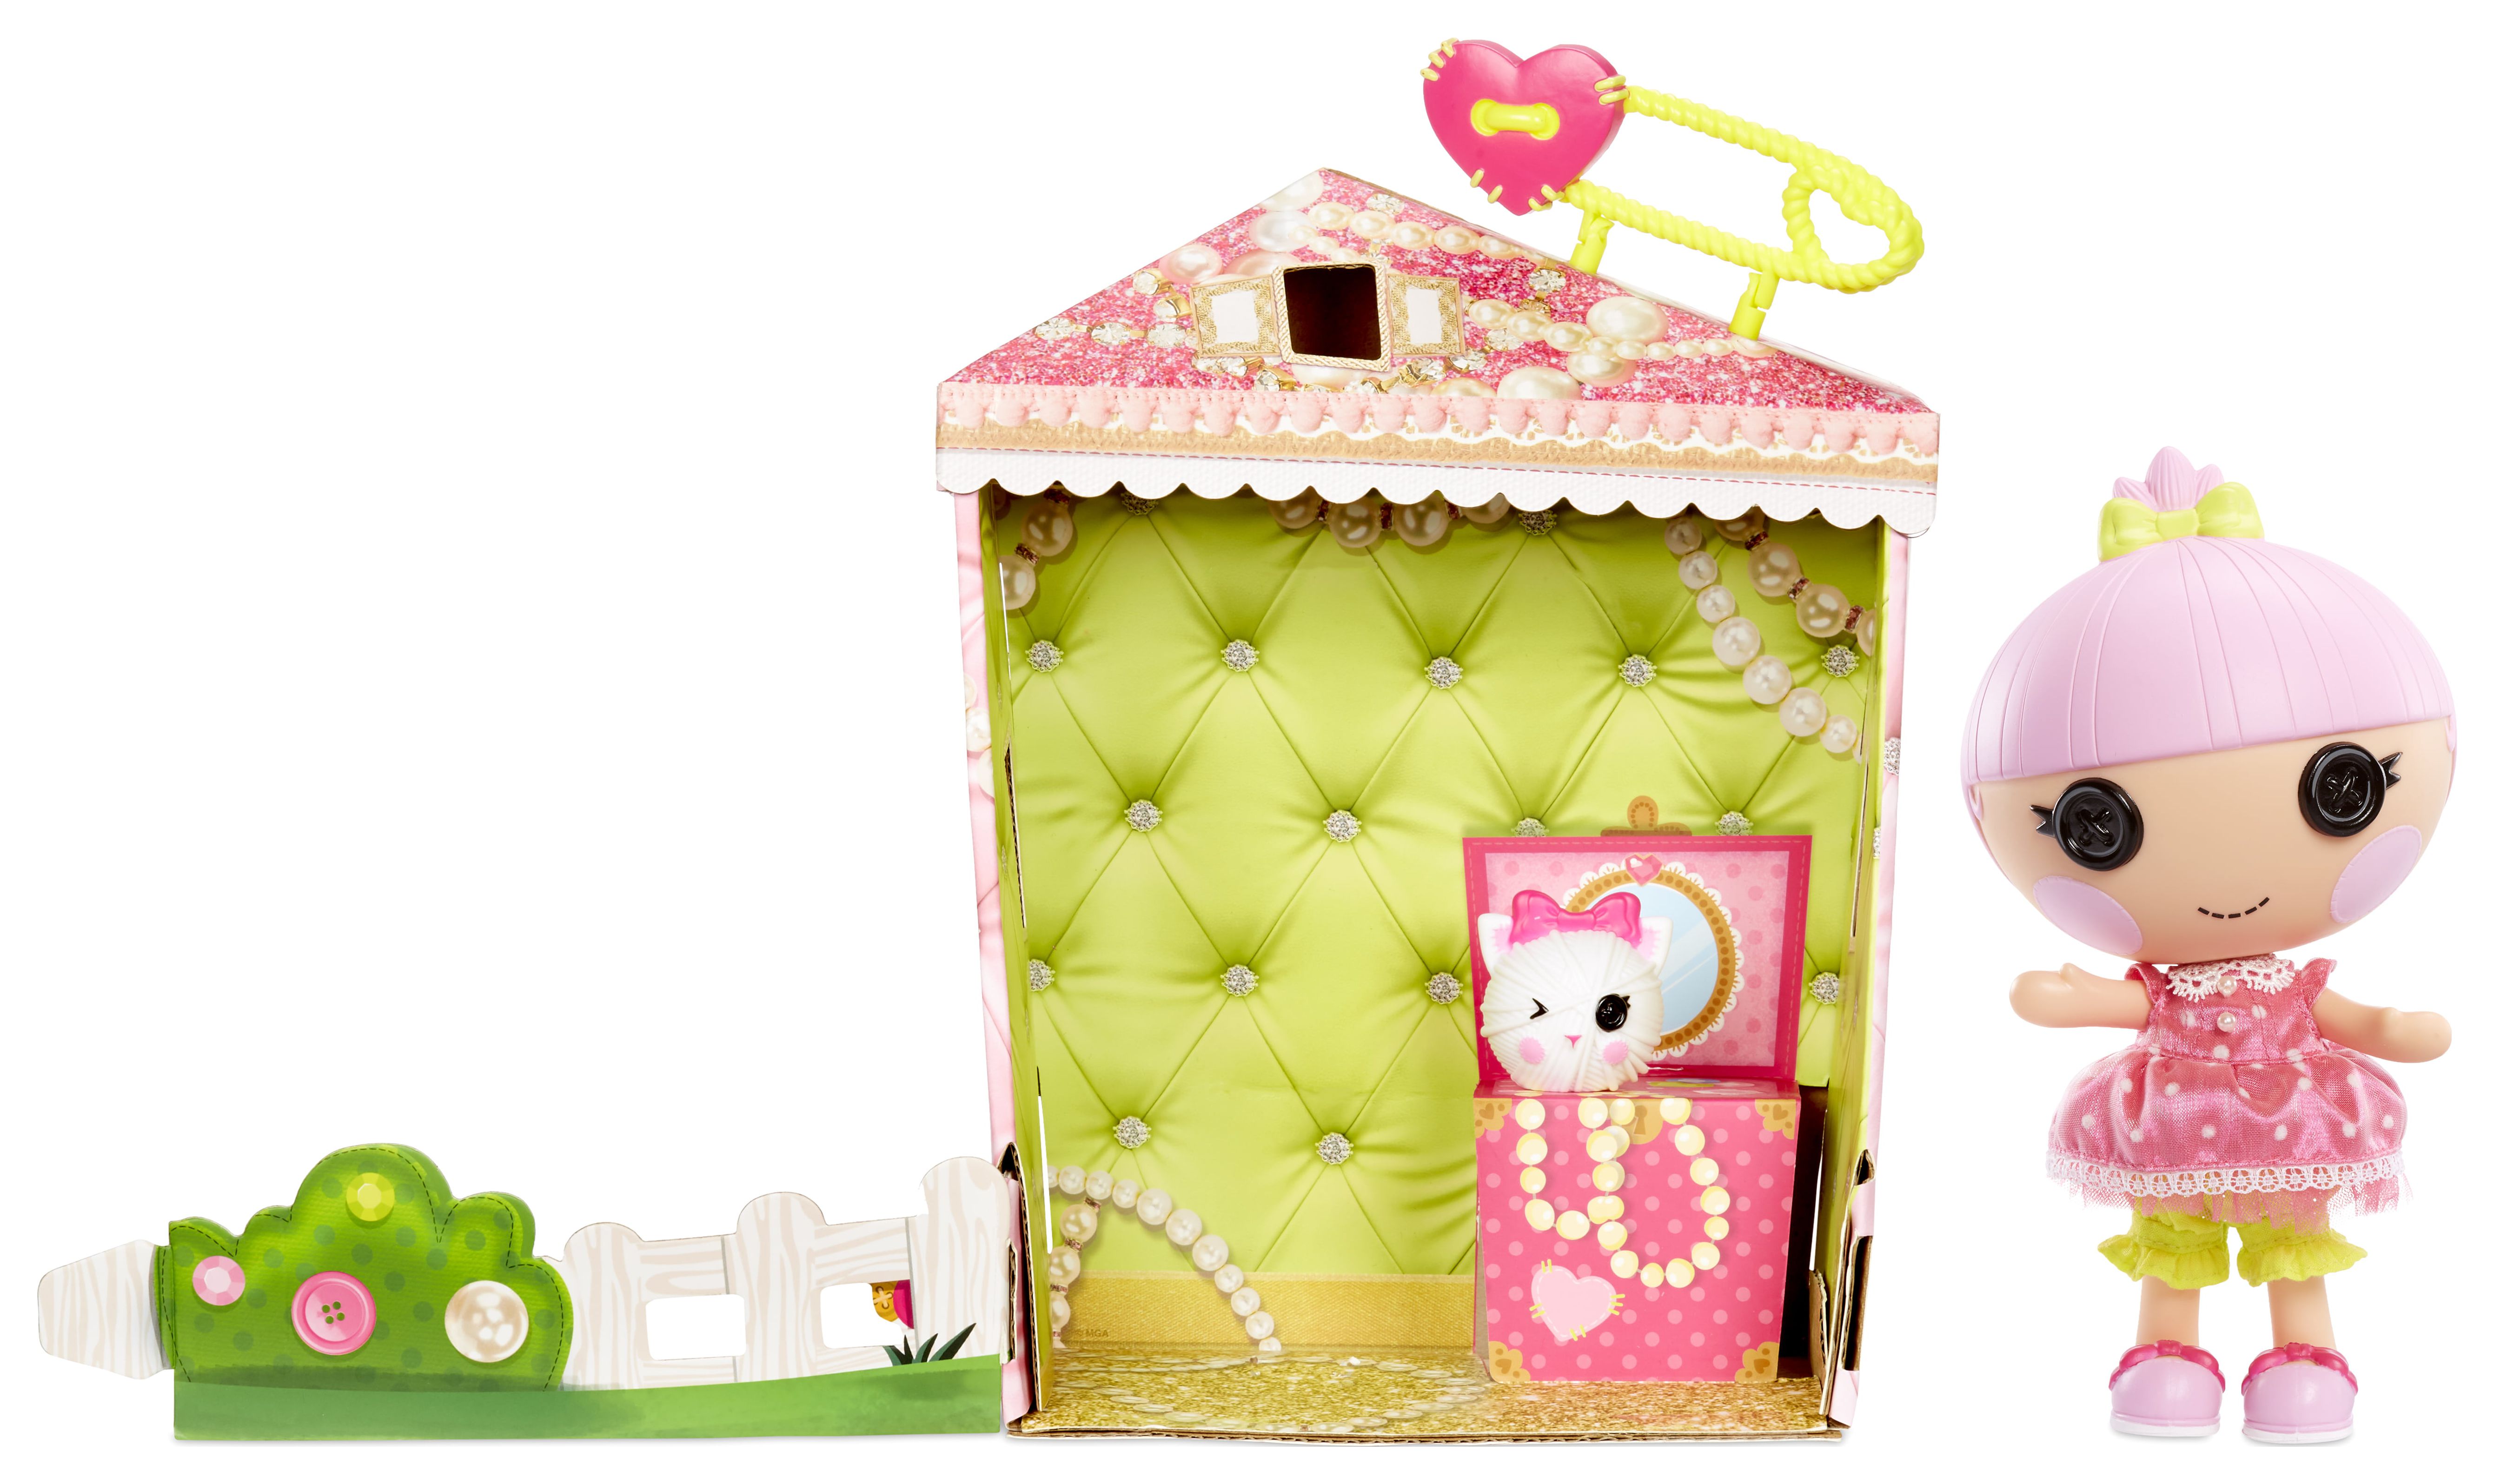 Lalaloopsy Littles Doll Trinket Sparkles and Pet Kitten Playset, 7" Princess Doll With Changeable Pink Outfit and Shoes in Reusable Play House Package, Toys for Girls Ages 3 4 5+ to 103 - image 2 of 5